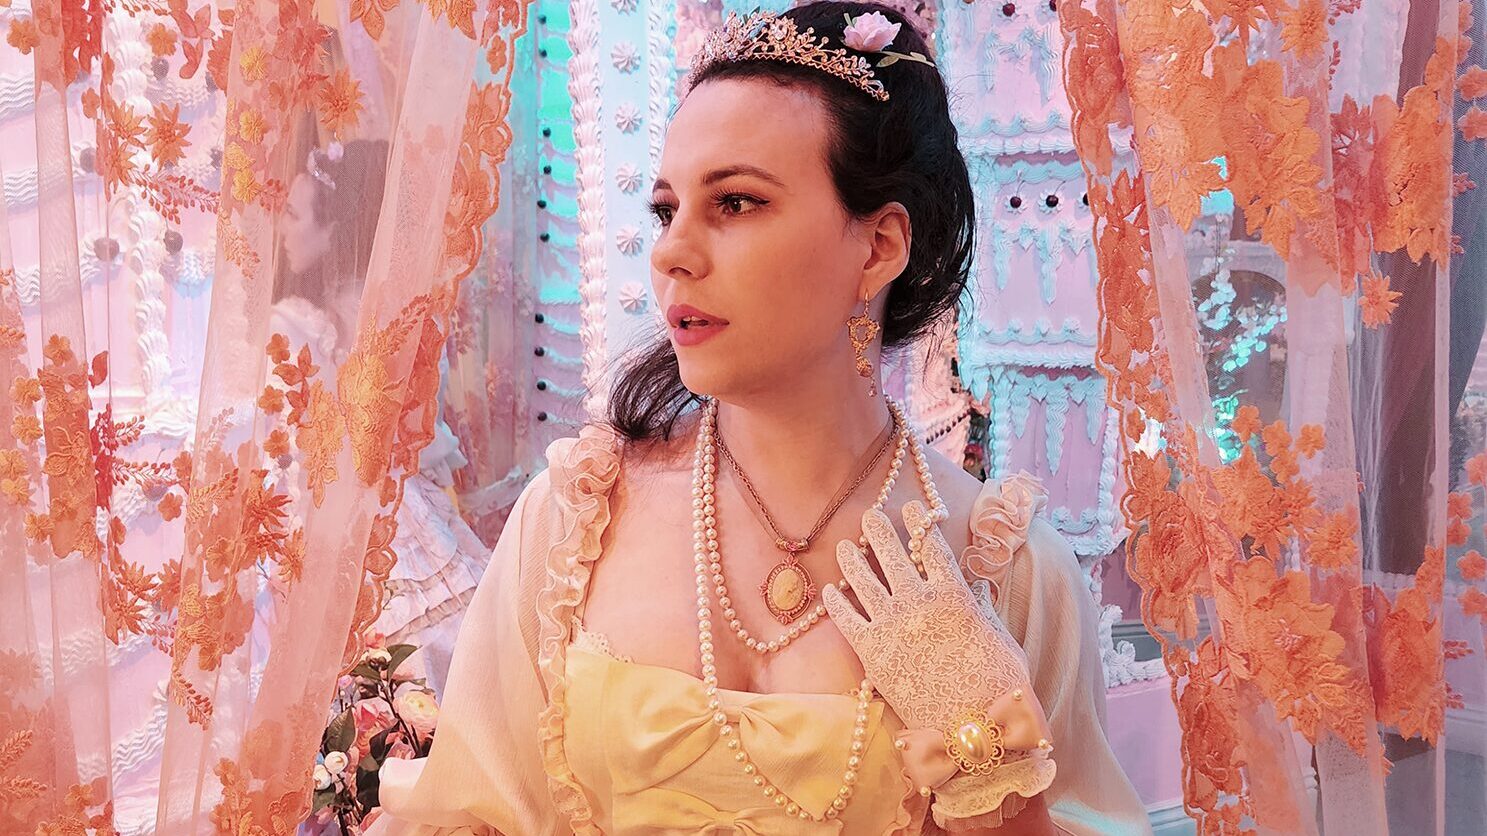 A photo of the author, Nicoletta, pictured in a pink rococo dress with gloves and fan, her dark hair piled high and a tiara on her brow.